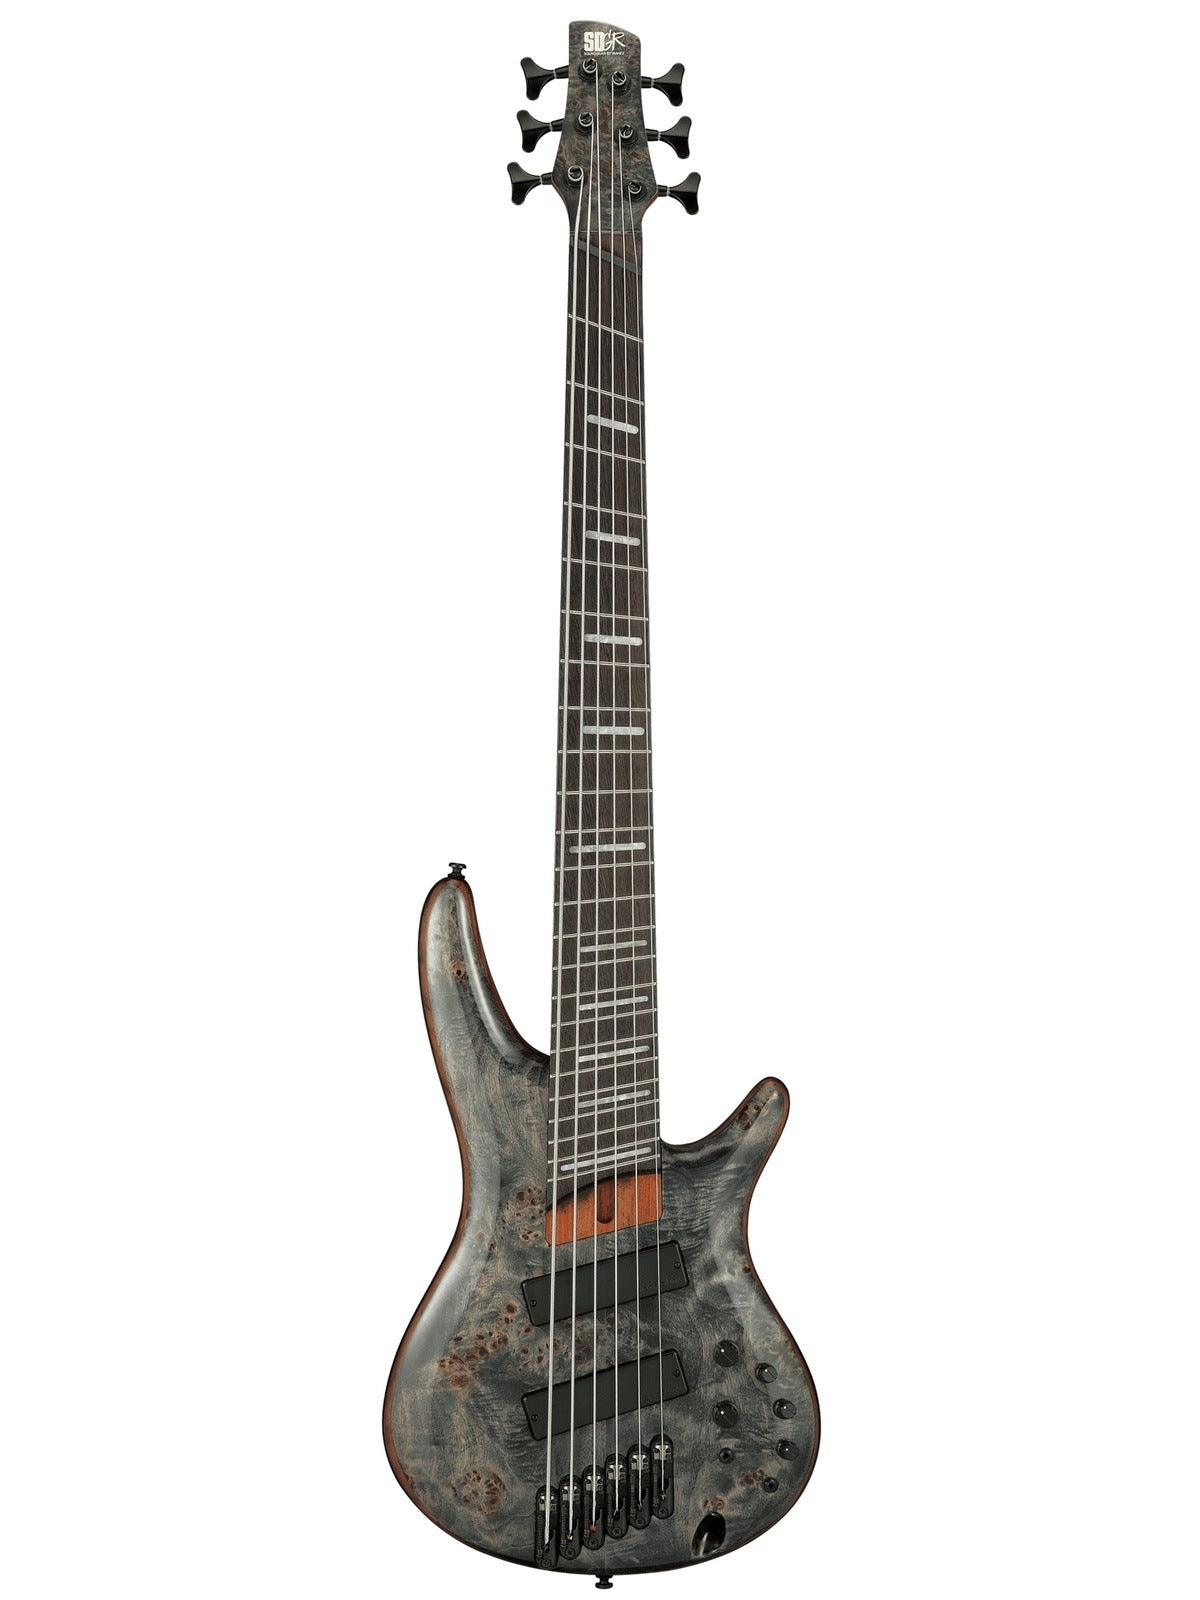 Ibanez SRMS806 Multi-Scale 6-String Electric Bass